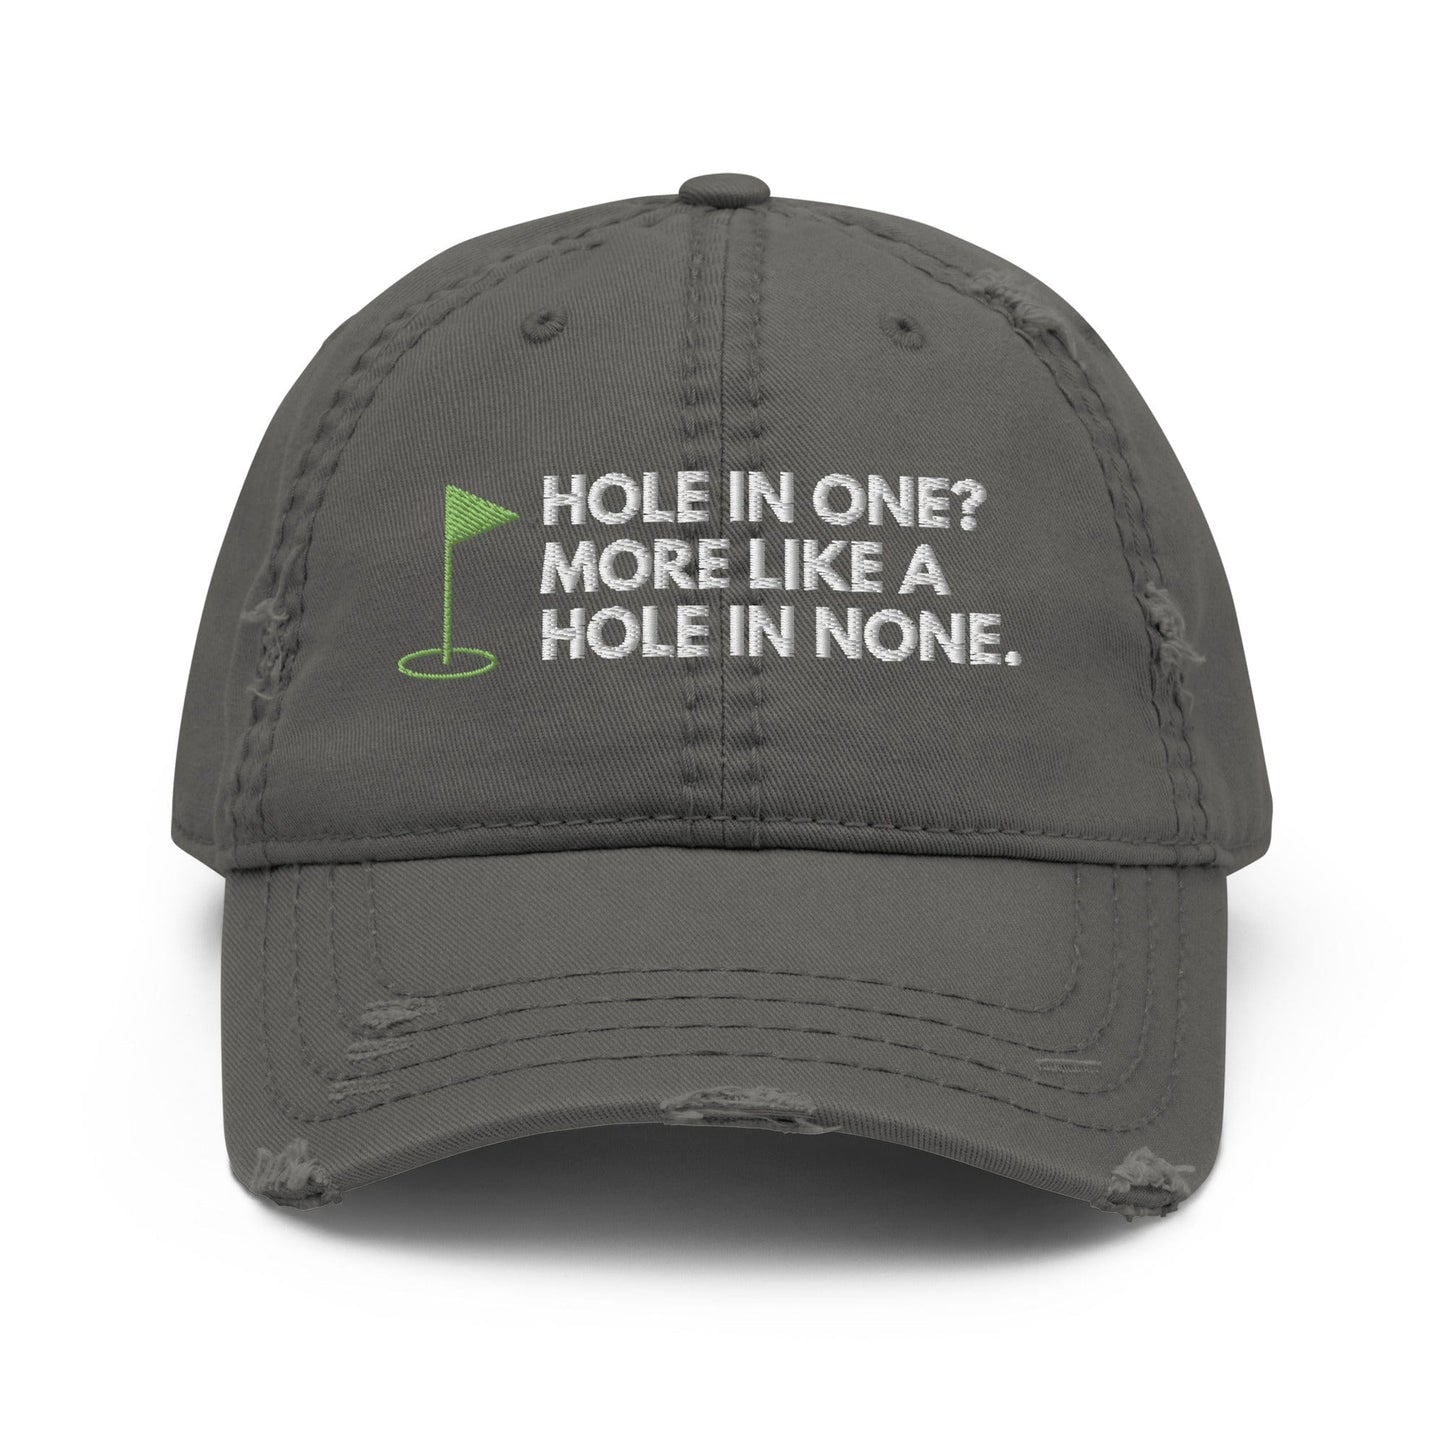 Funny Golfer Gifts  Distressed Cap Charcoal Grey Hole In One More Like Hole In None Hat Distressed Hat